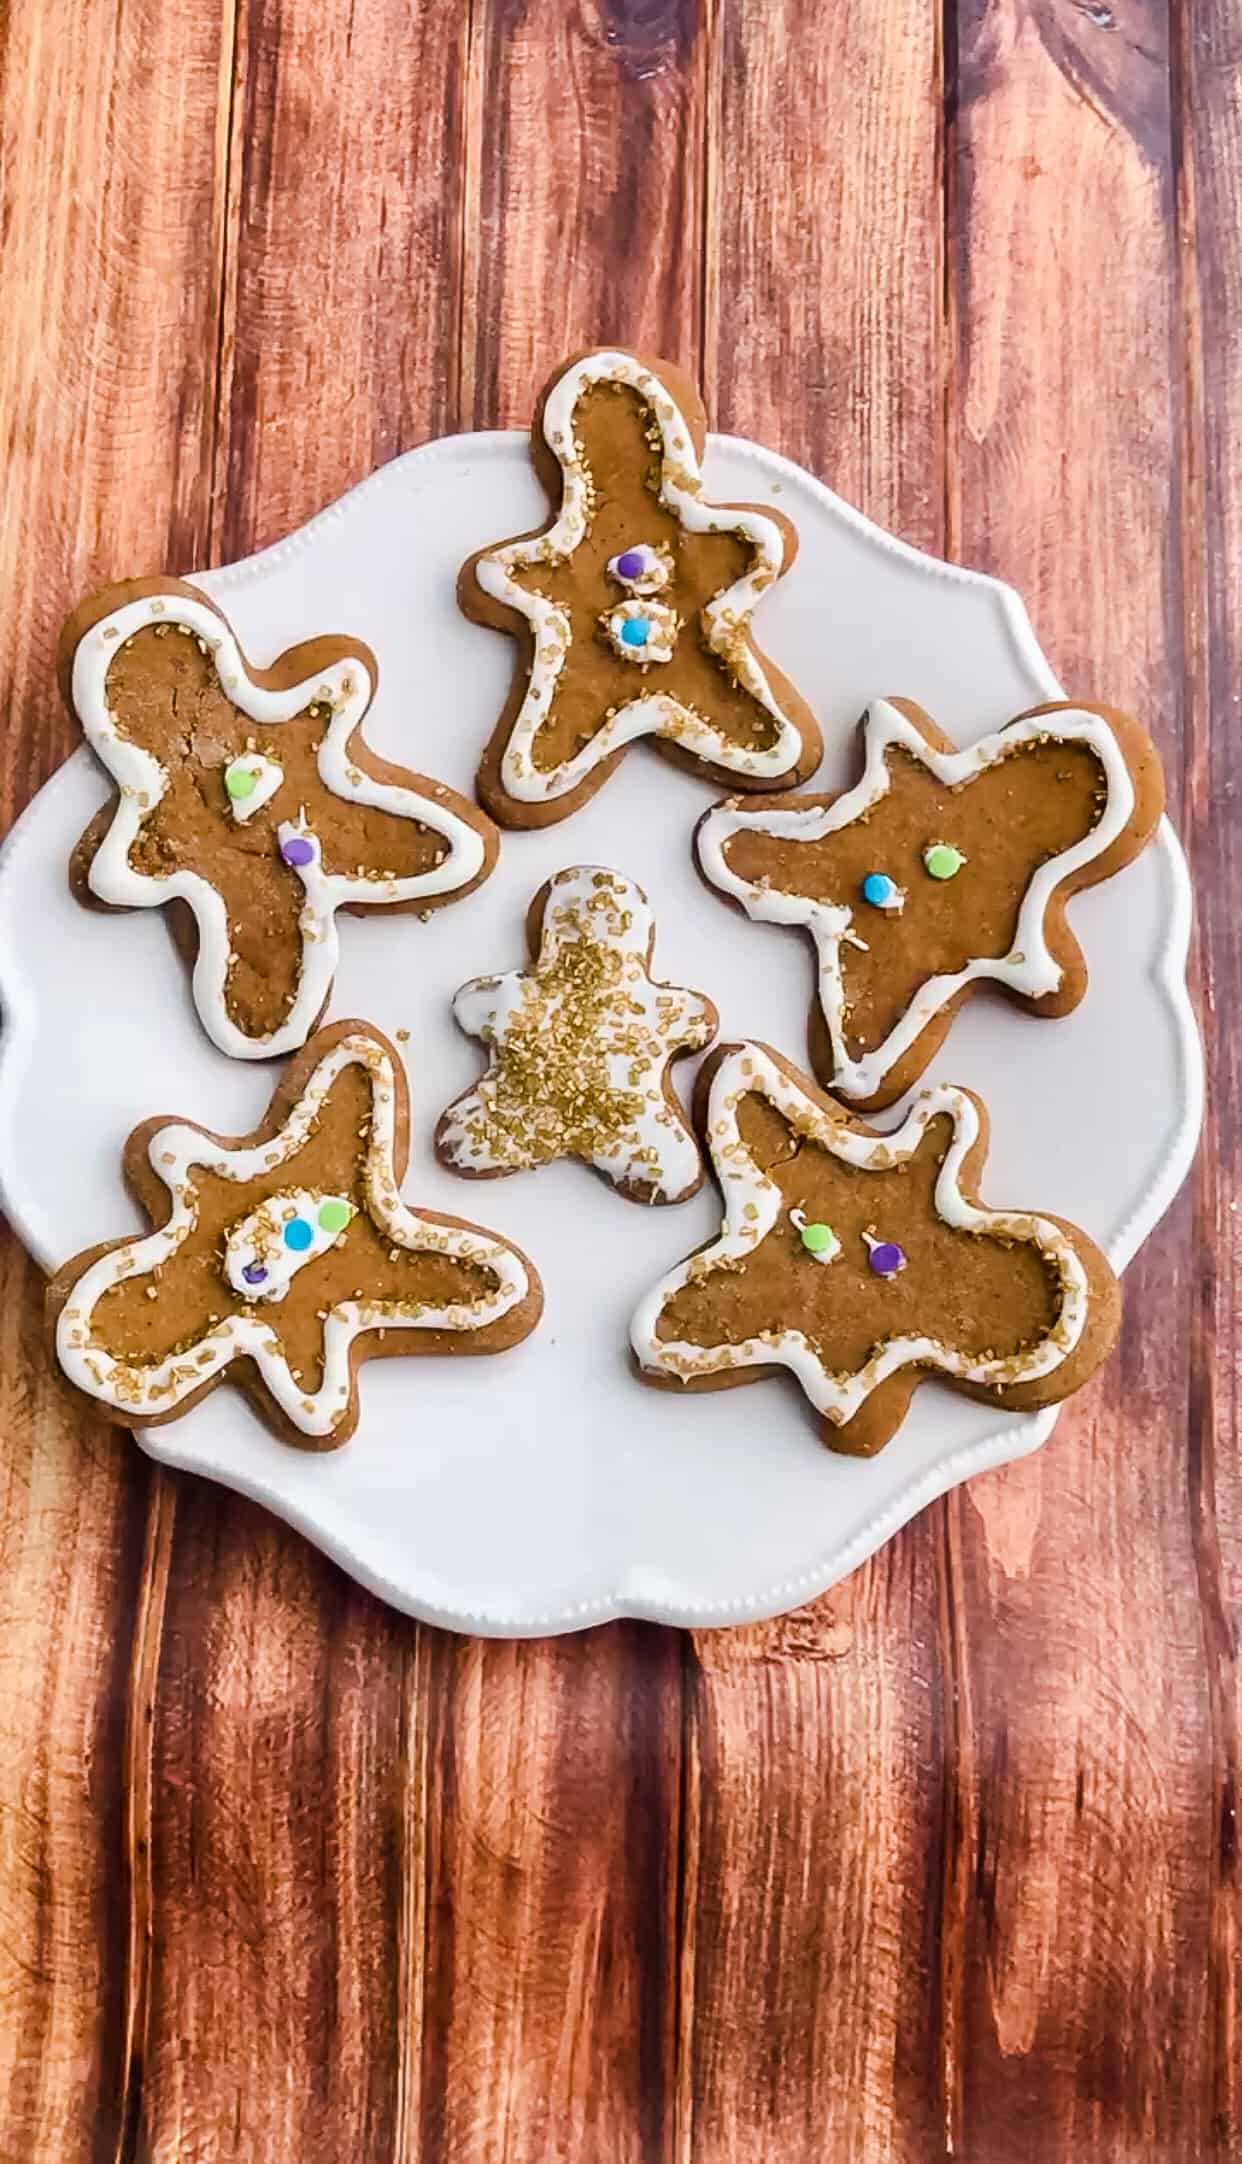 A plate of six classic gingerbread man cookies in two different sizes decorated with white icing and gold sprinkles.